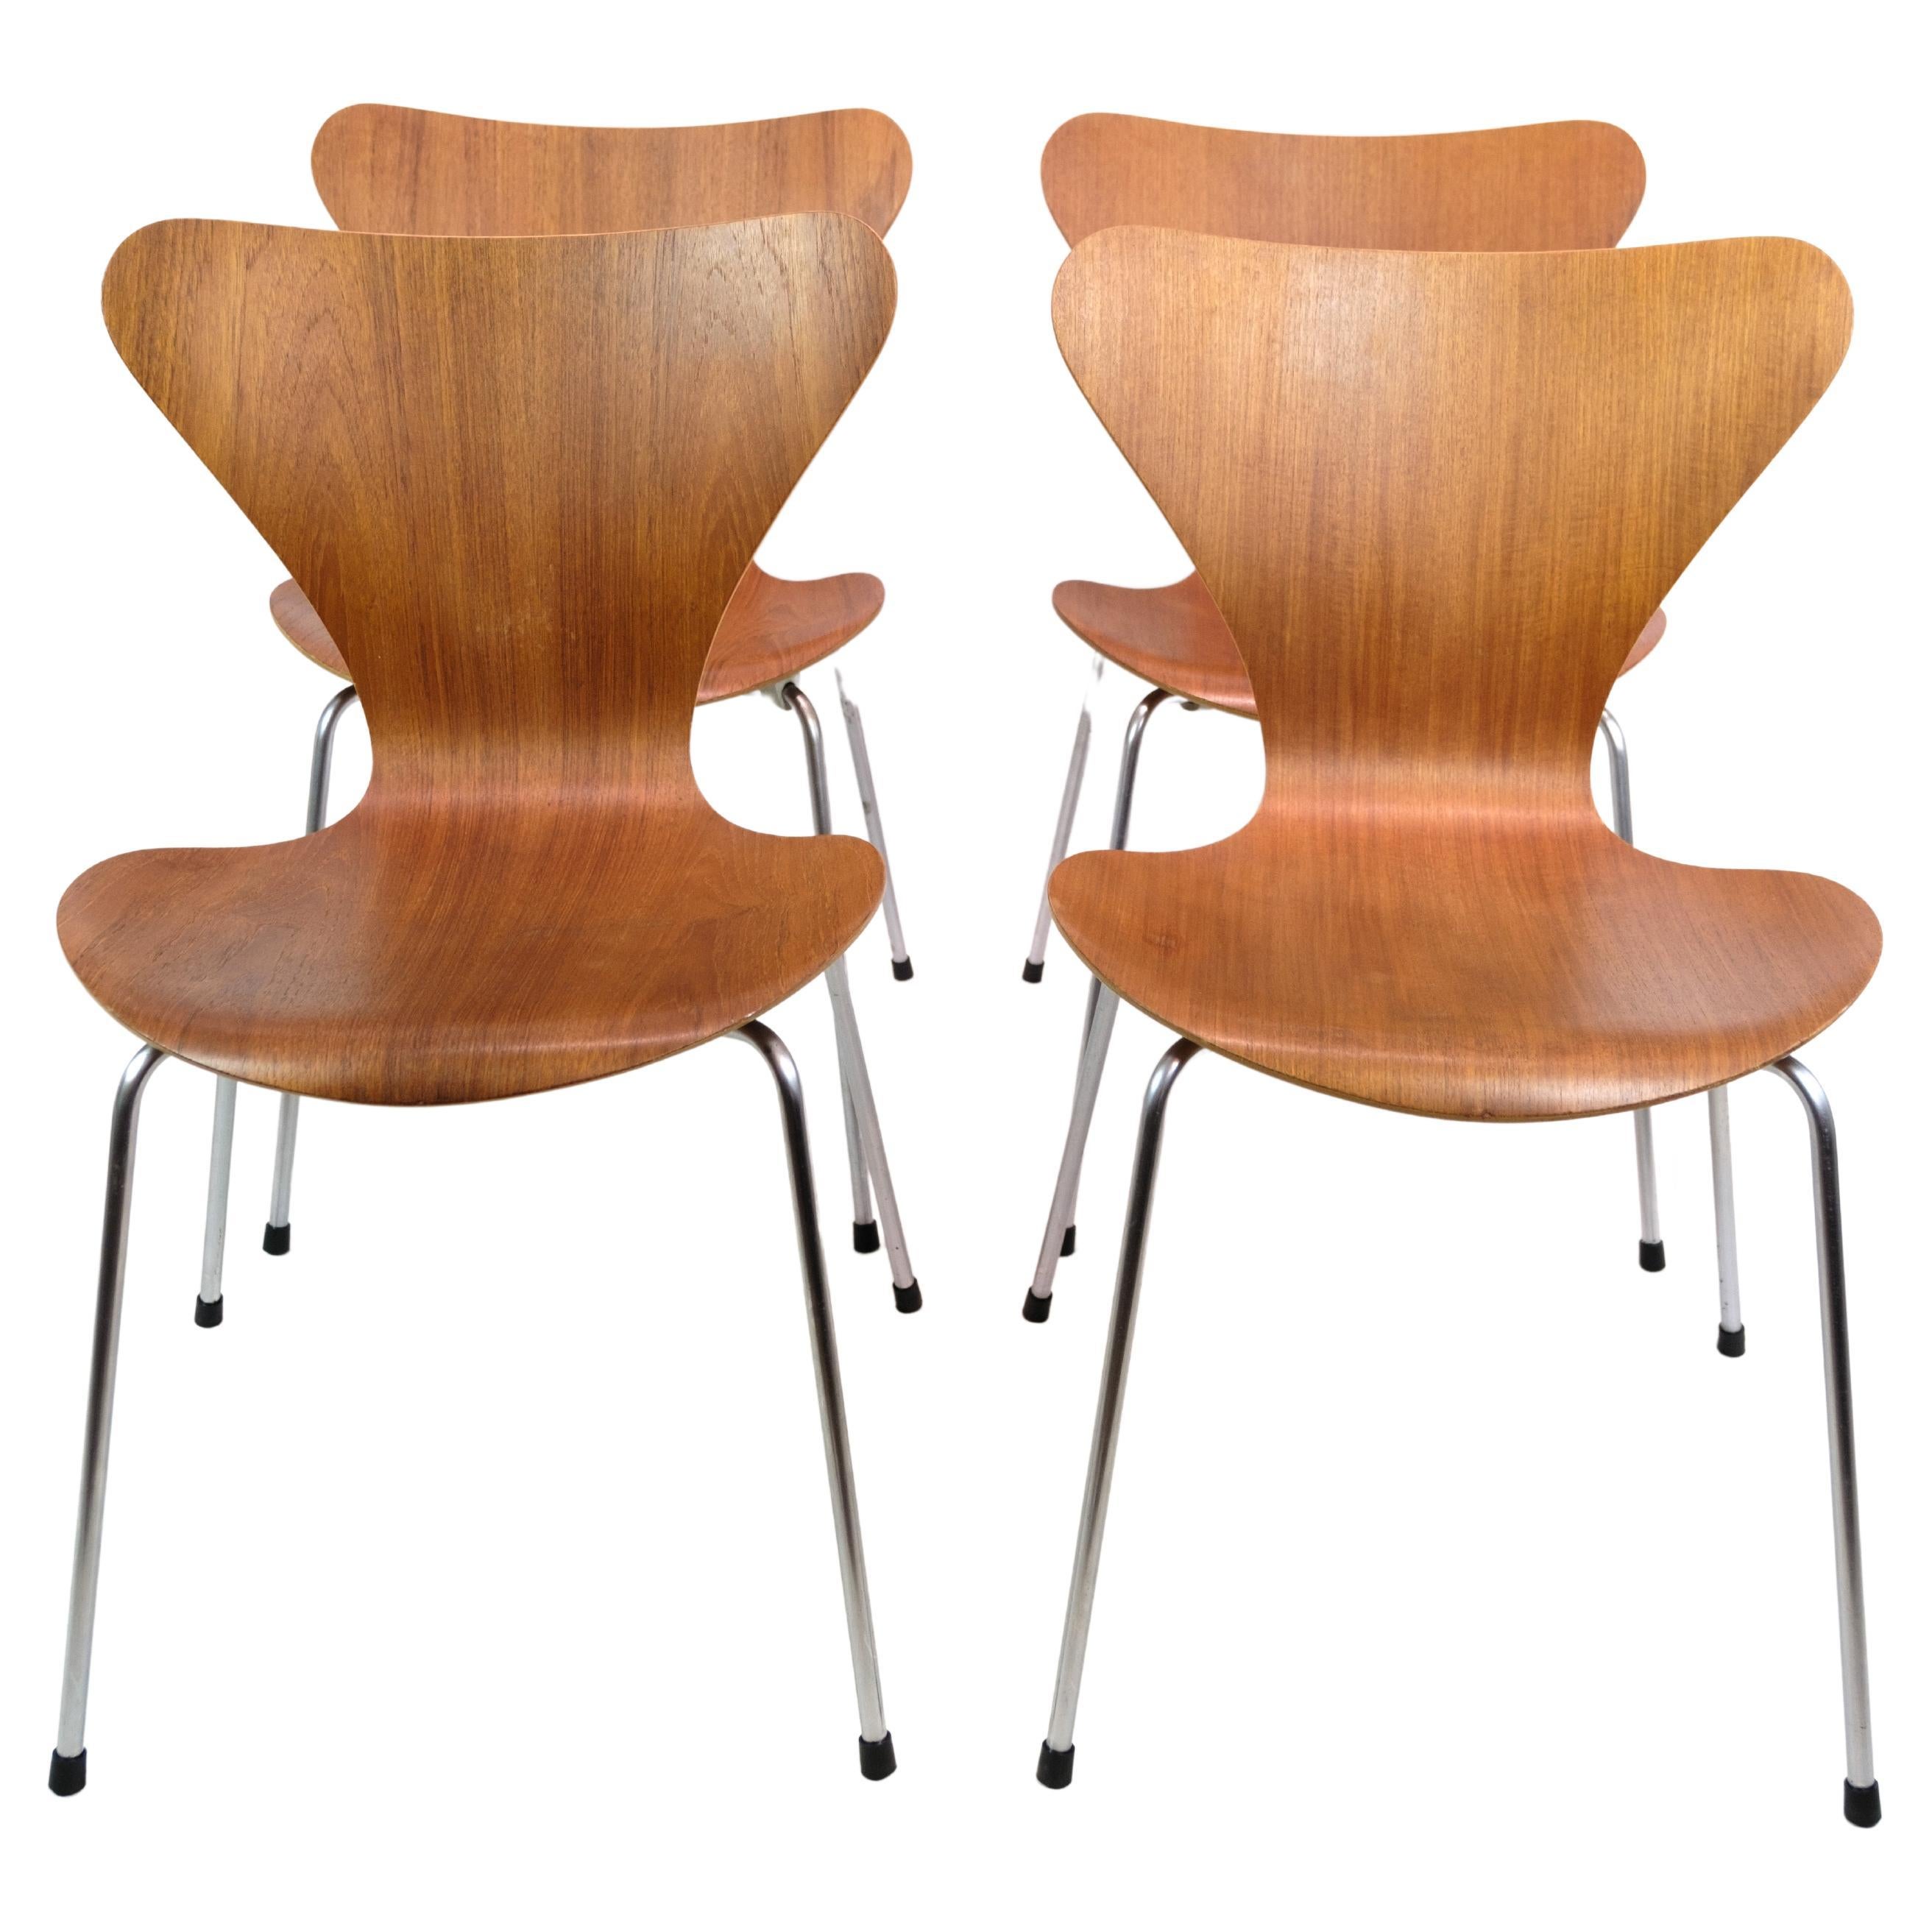 Set of 4 Seven Chairs In Teak wood by Arne Jacobsen and Fritz Hansen from 1960